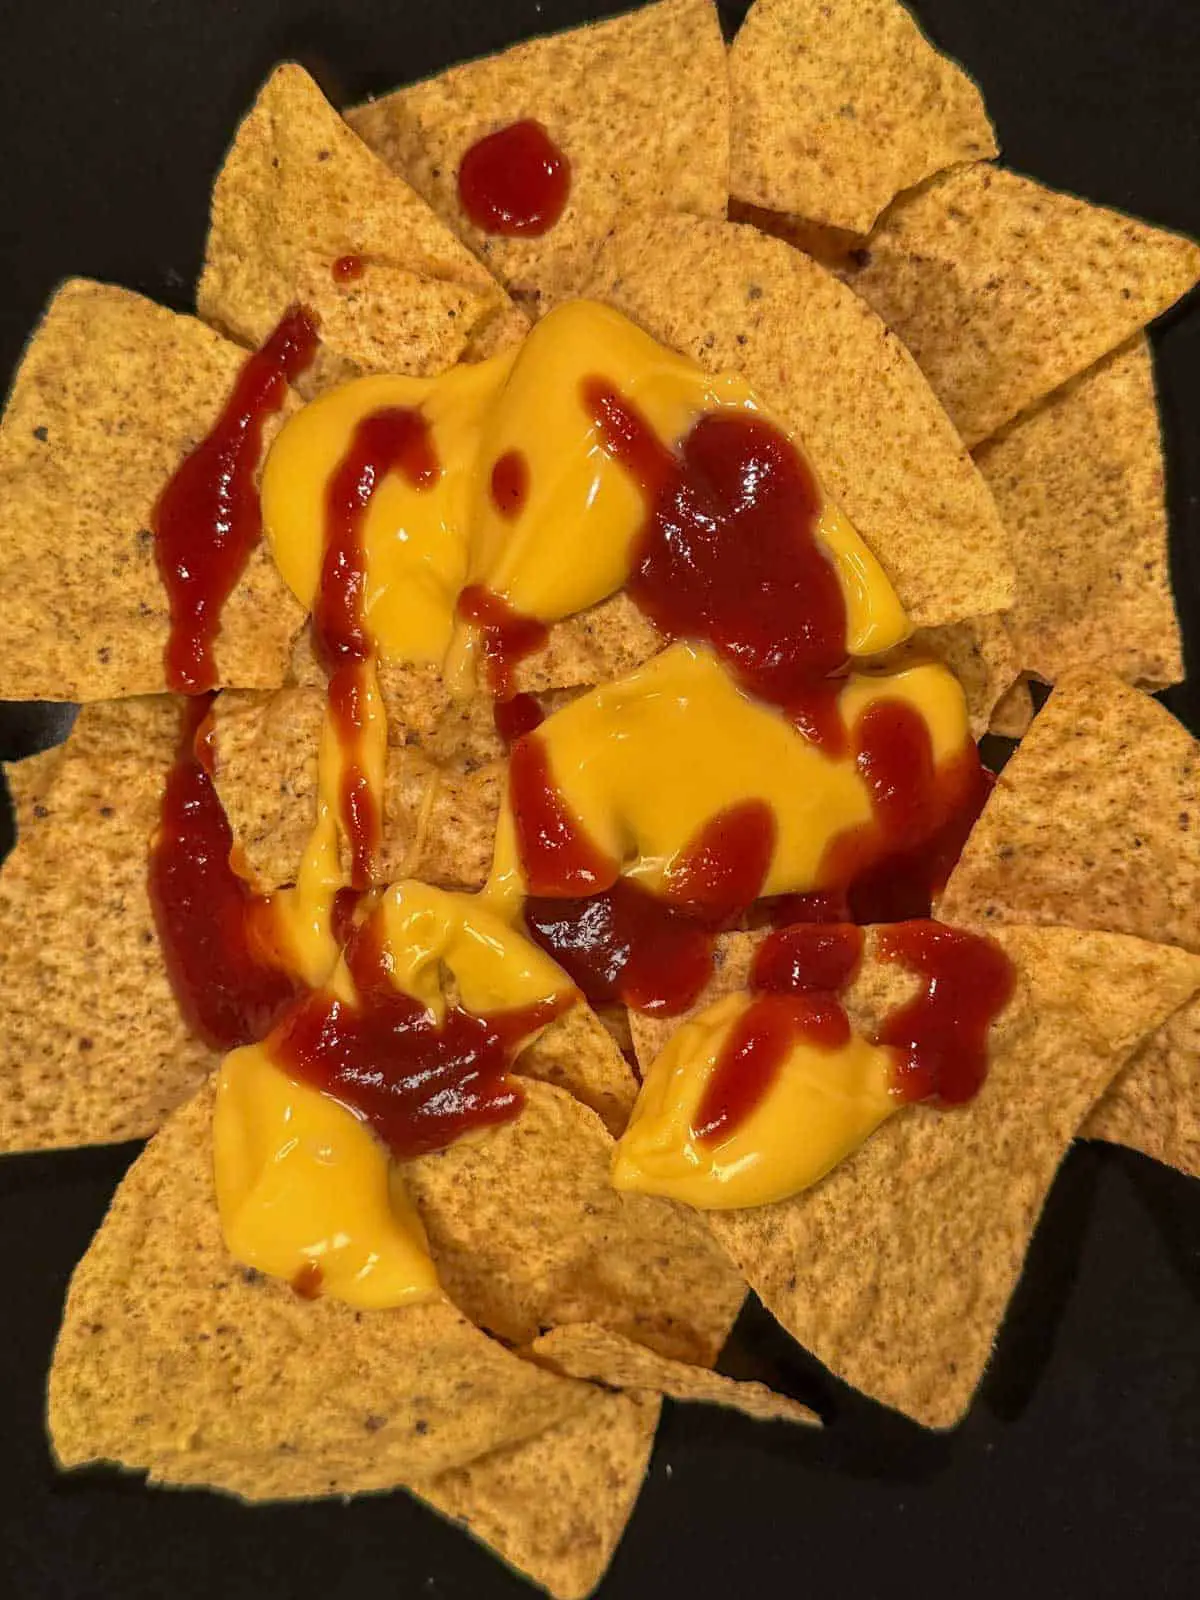 Tortilla chips topped with cheese sauce and barbecue sauce on a black plate.